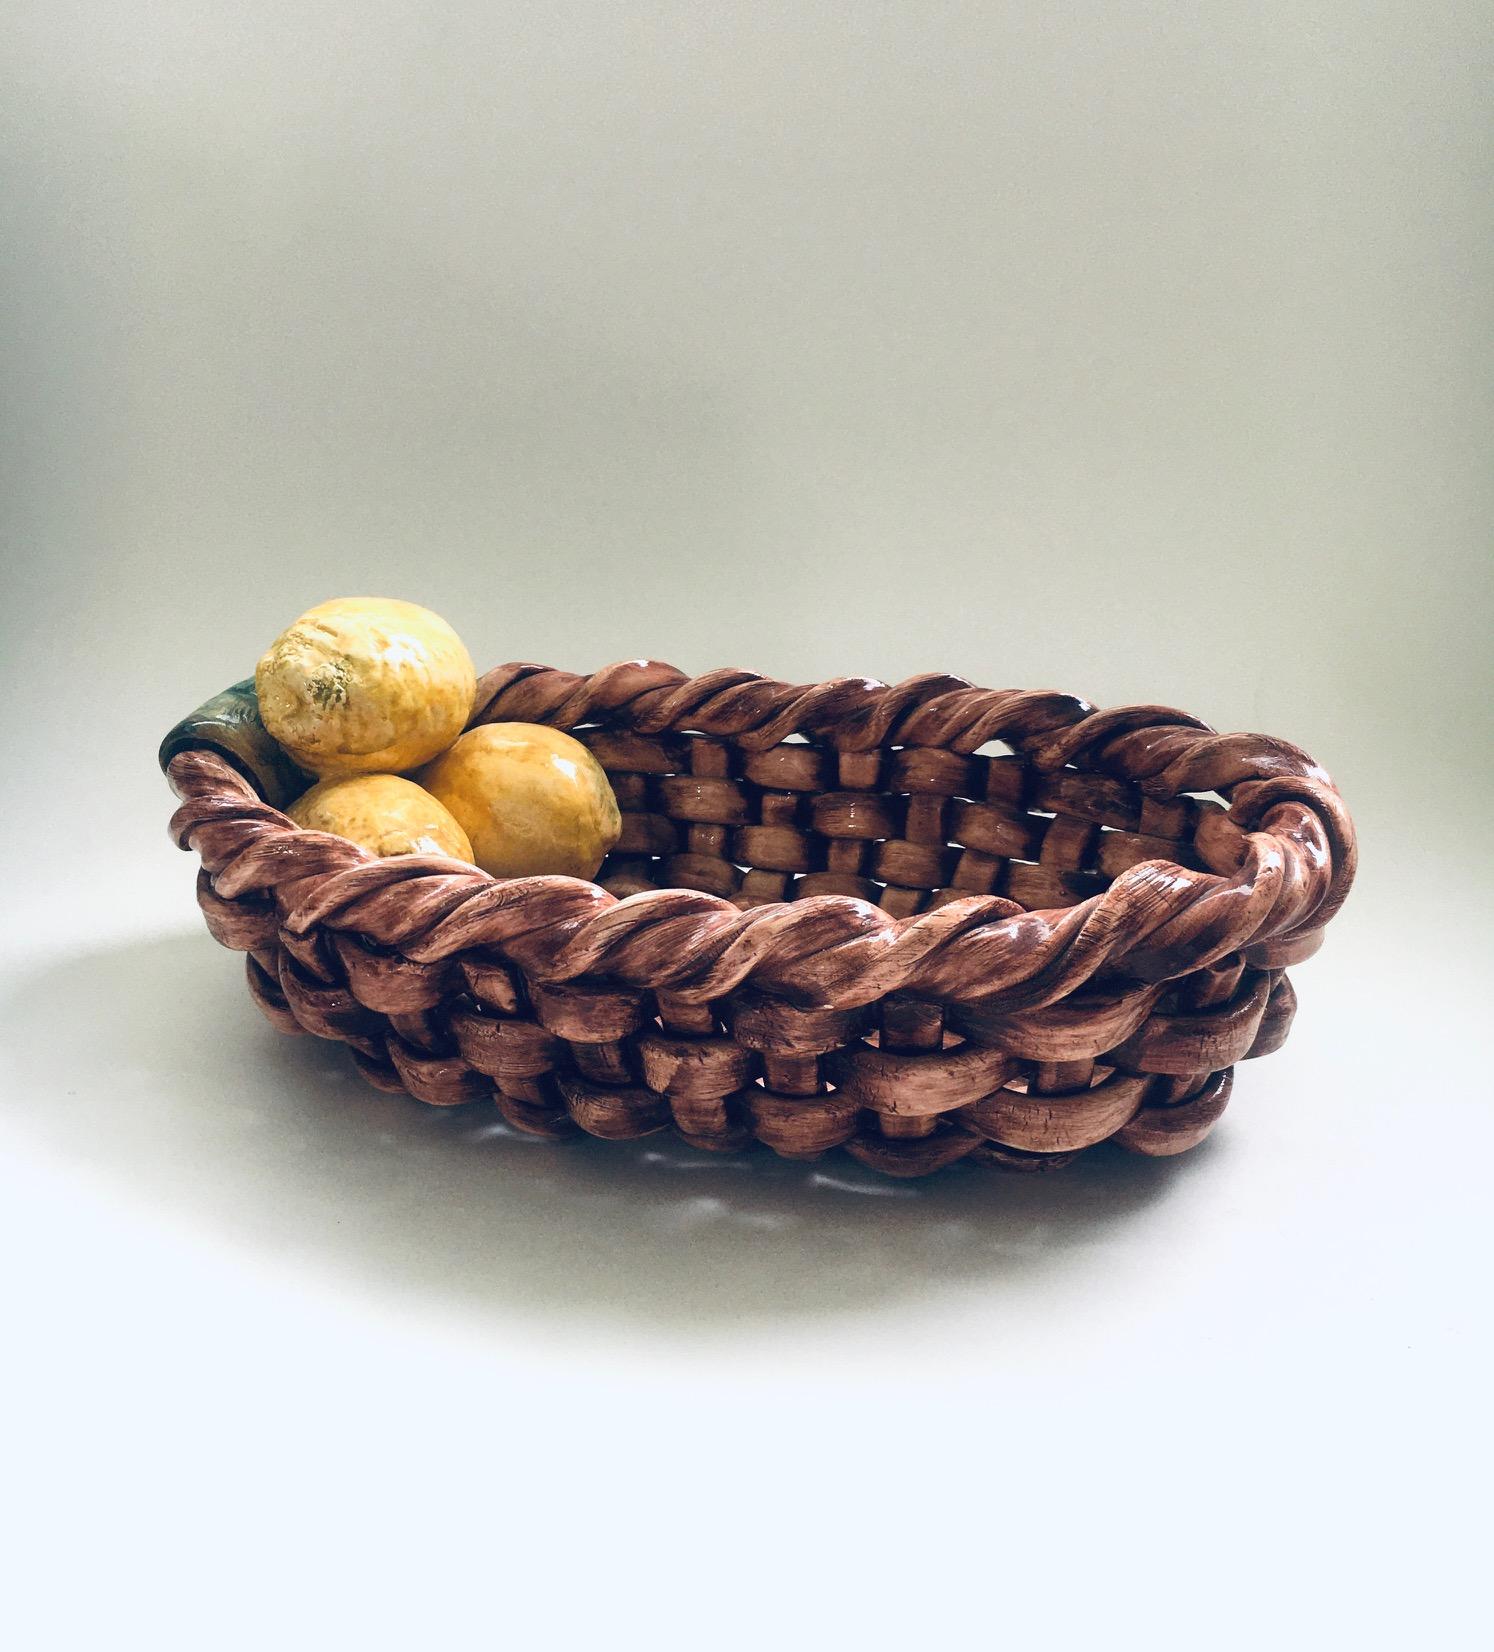 Other Studio Pottery Citrus Fruit Basket by J. Santos for Alcobaca, Portugal 1950's For Sale